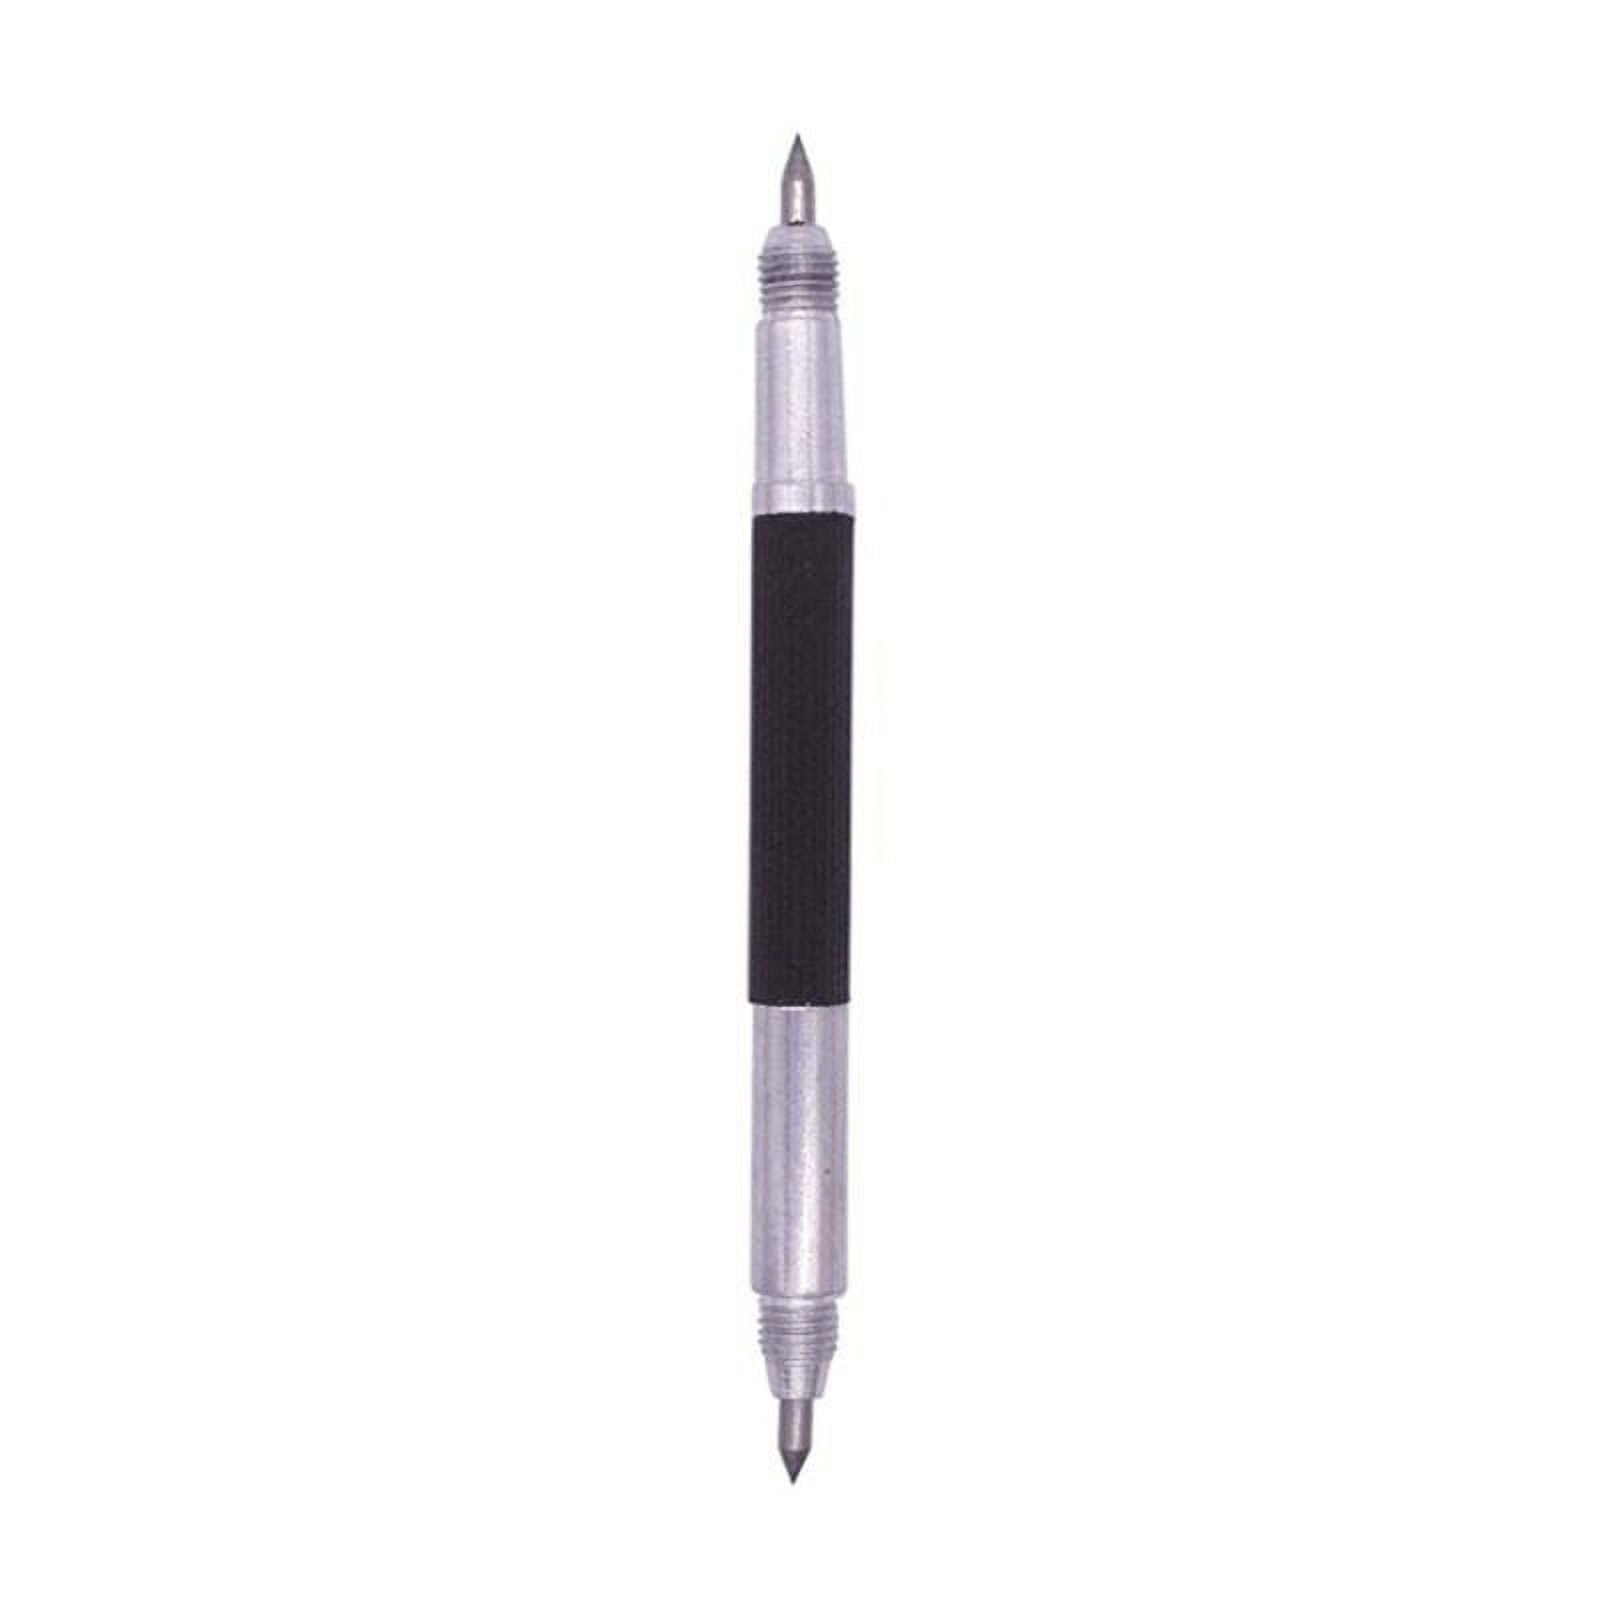 Etching Pen DIY Engraving Etcher Etching Tool for Metal Glass Ceramic Jewelry, Size: 23 in, Silver